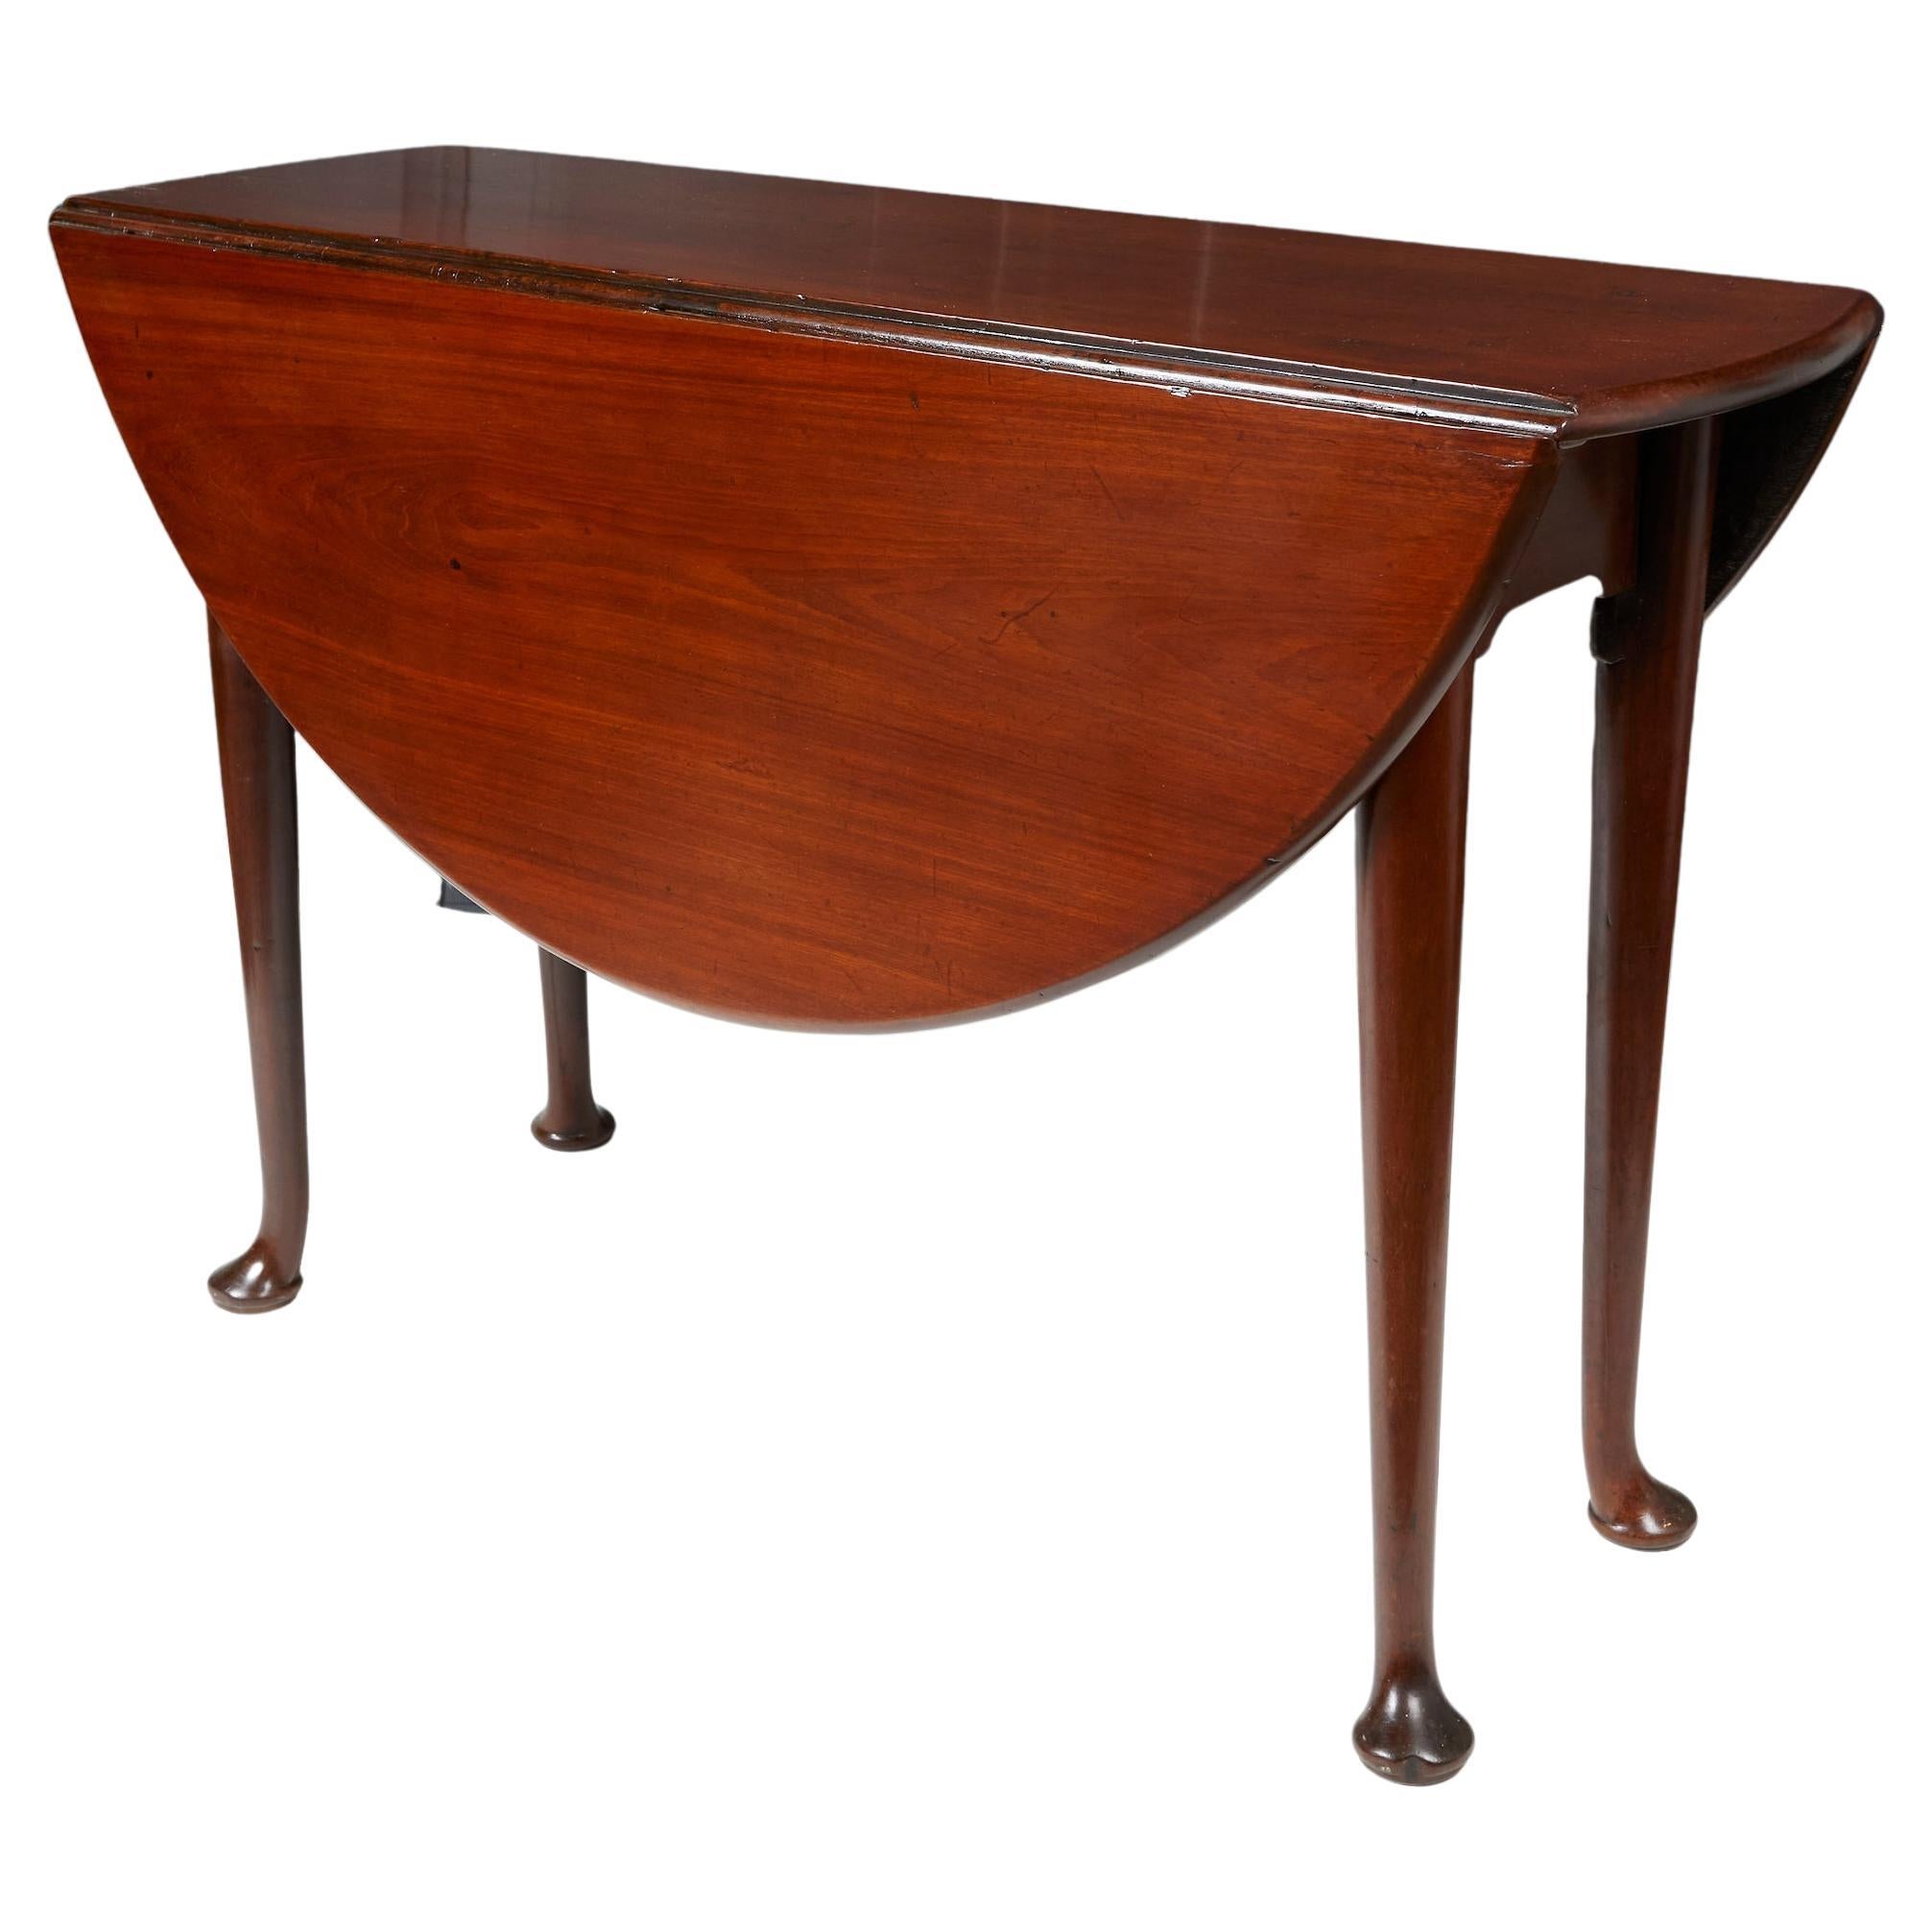 Mahogany Queen Anne Drop Leaf Table